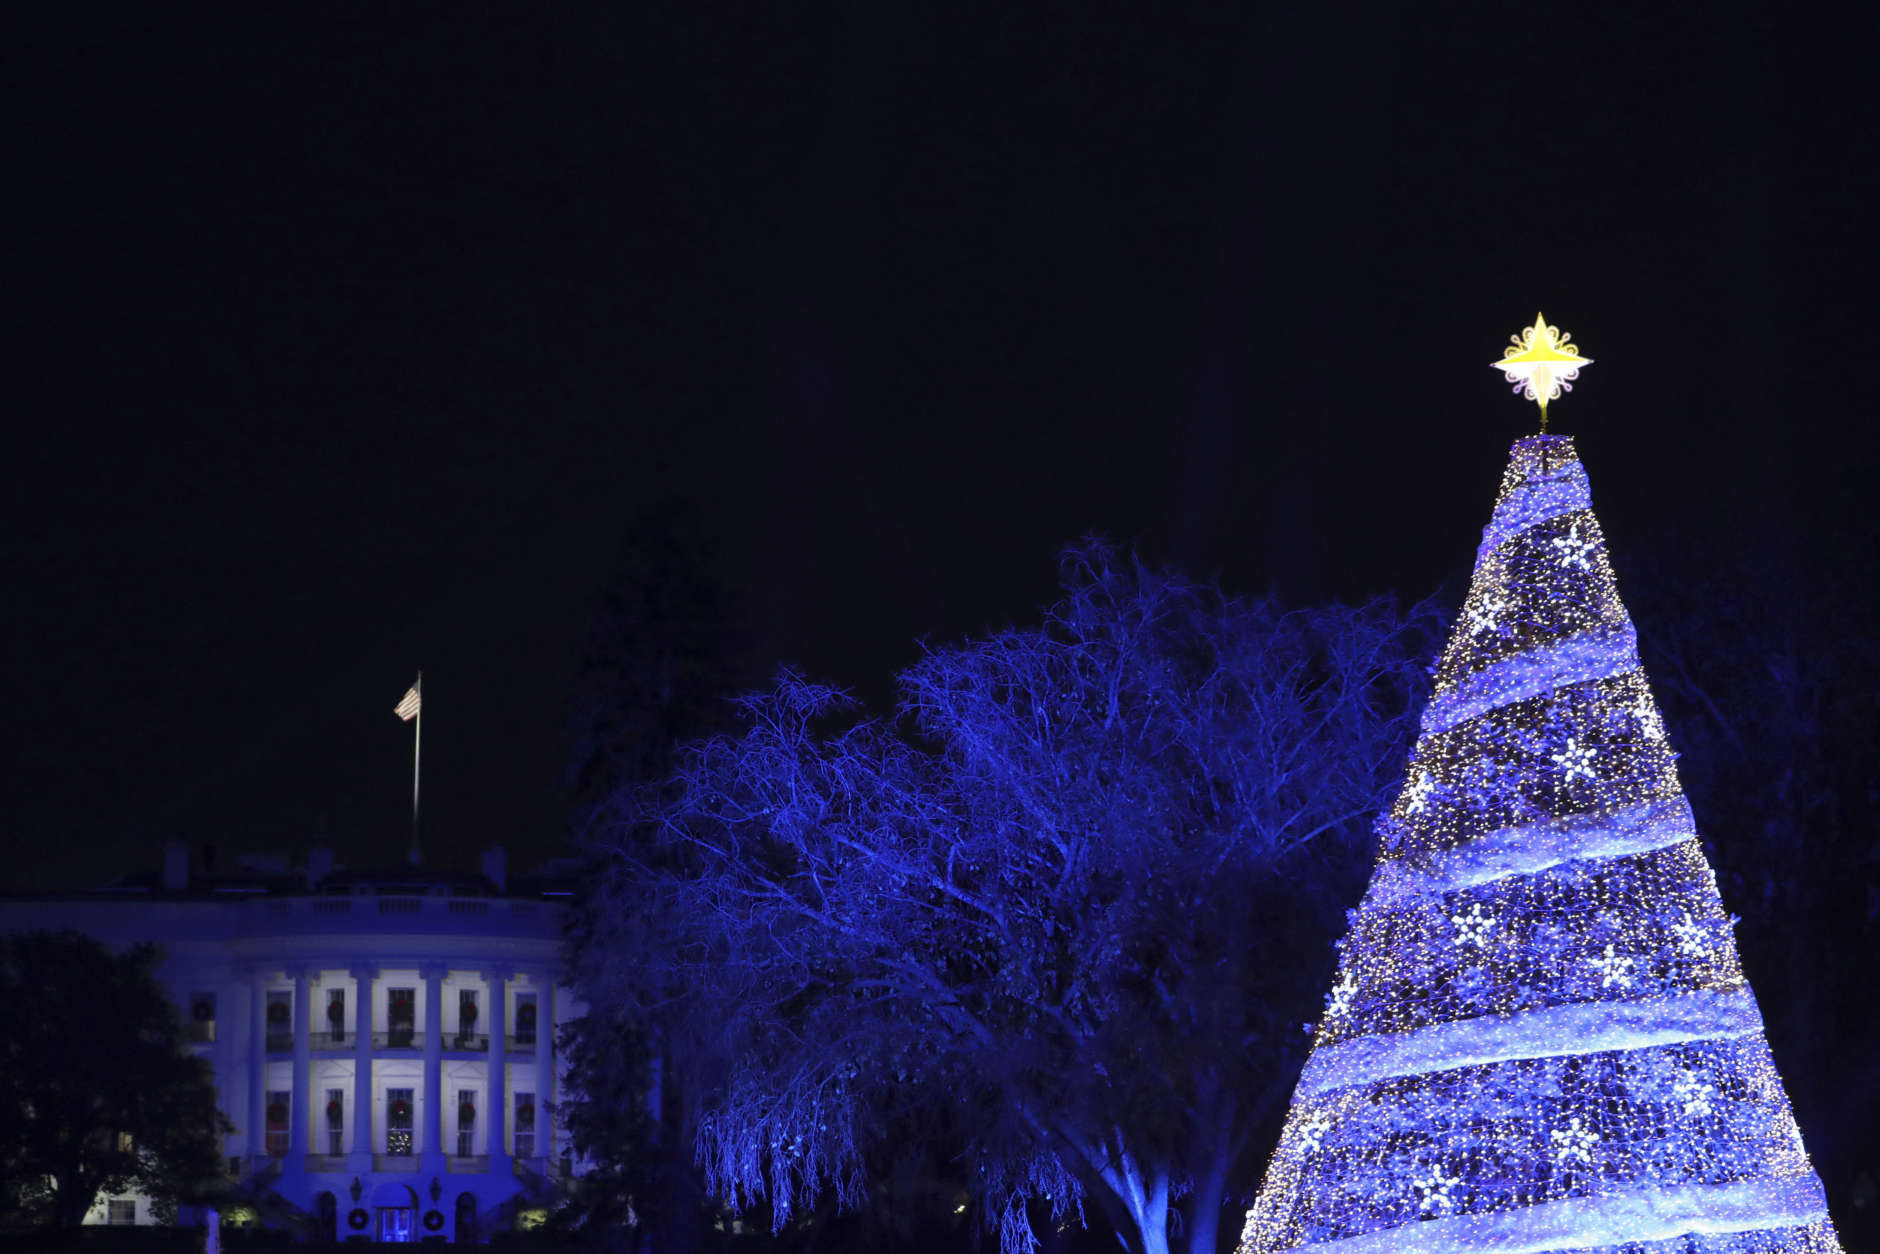 The 2017 National Christmas Tree is lit on the Ellipse with the White House in the background Thursday, Nov. 30, 2017, in Washington. (AP Photo/Andrew Harnik)